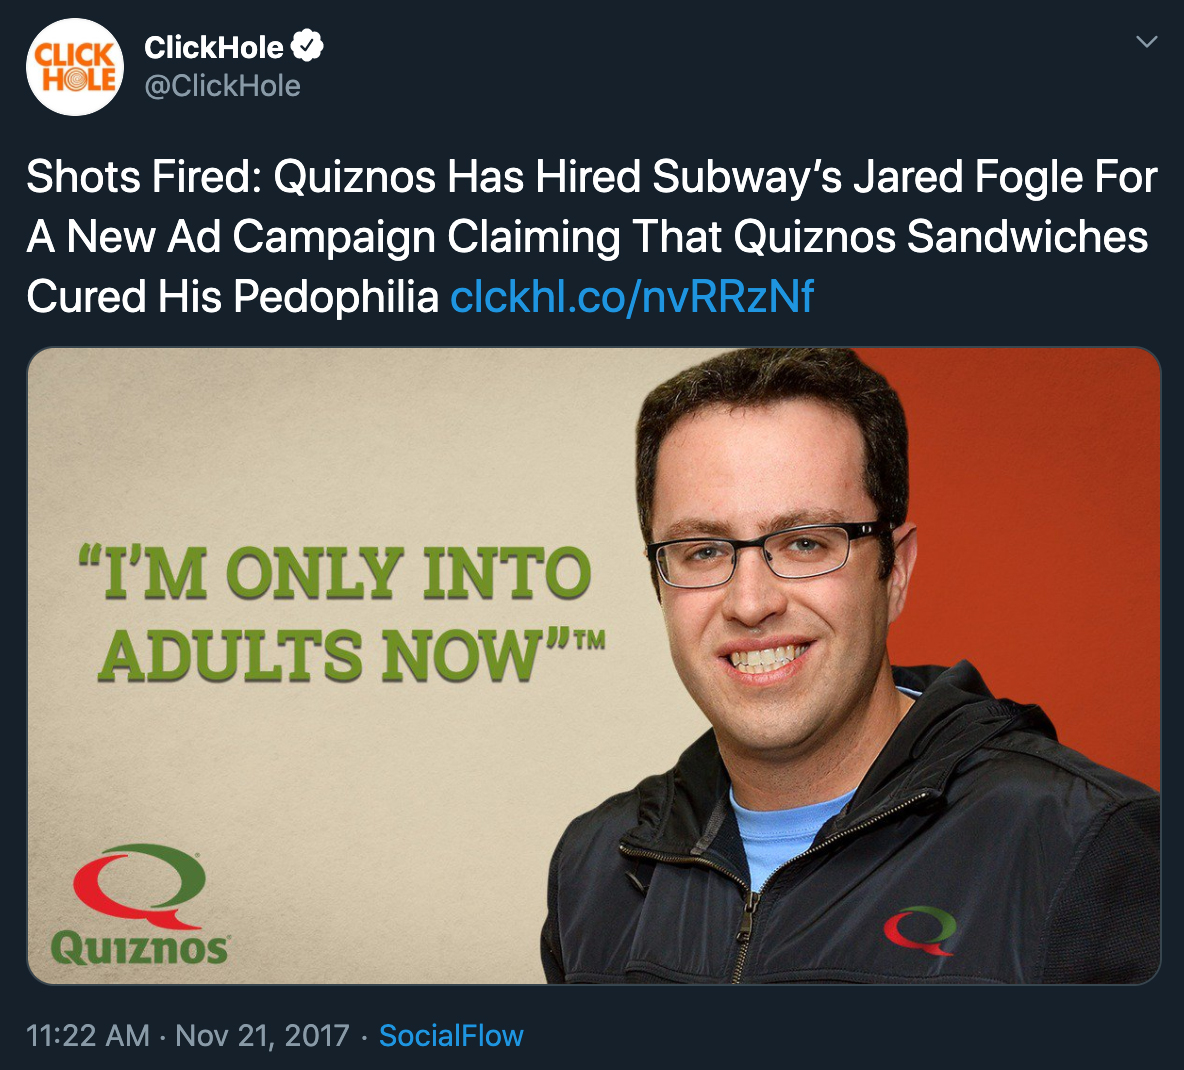 clickhole headlines - Hole Shots Fired Quiznos Has Hired Subway's Jared Fogle For A New Ad Campaign Claiming That Quiznos Sandwiches Cured His Pedophilia